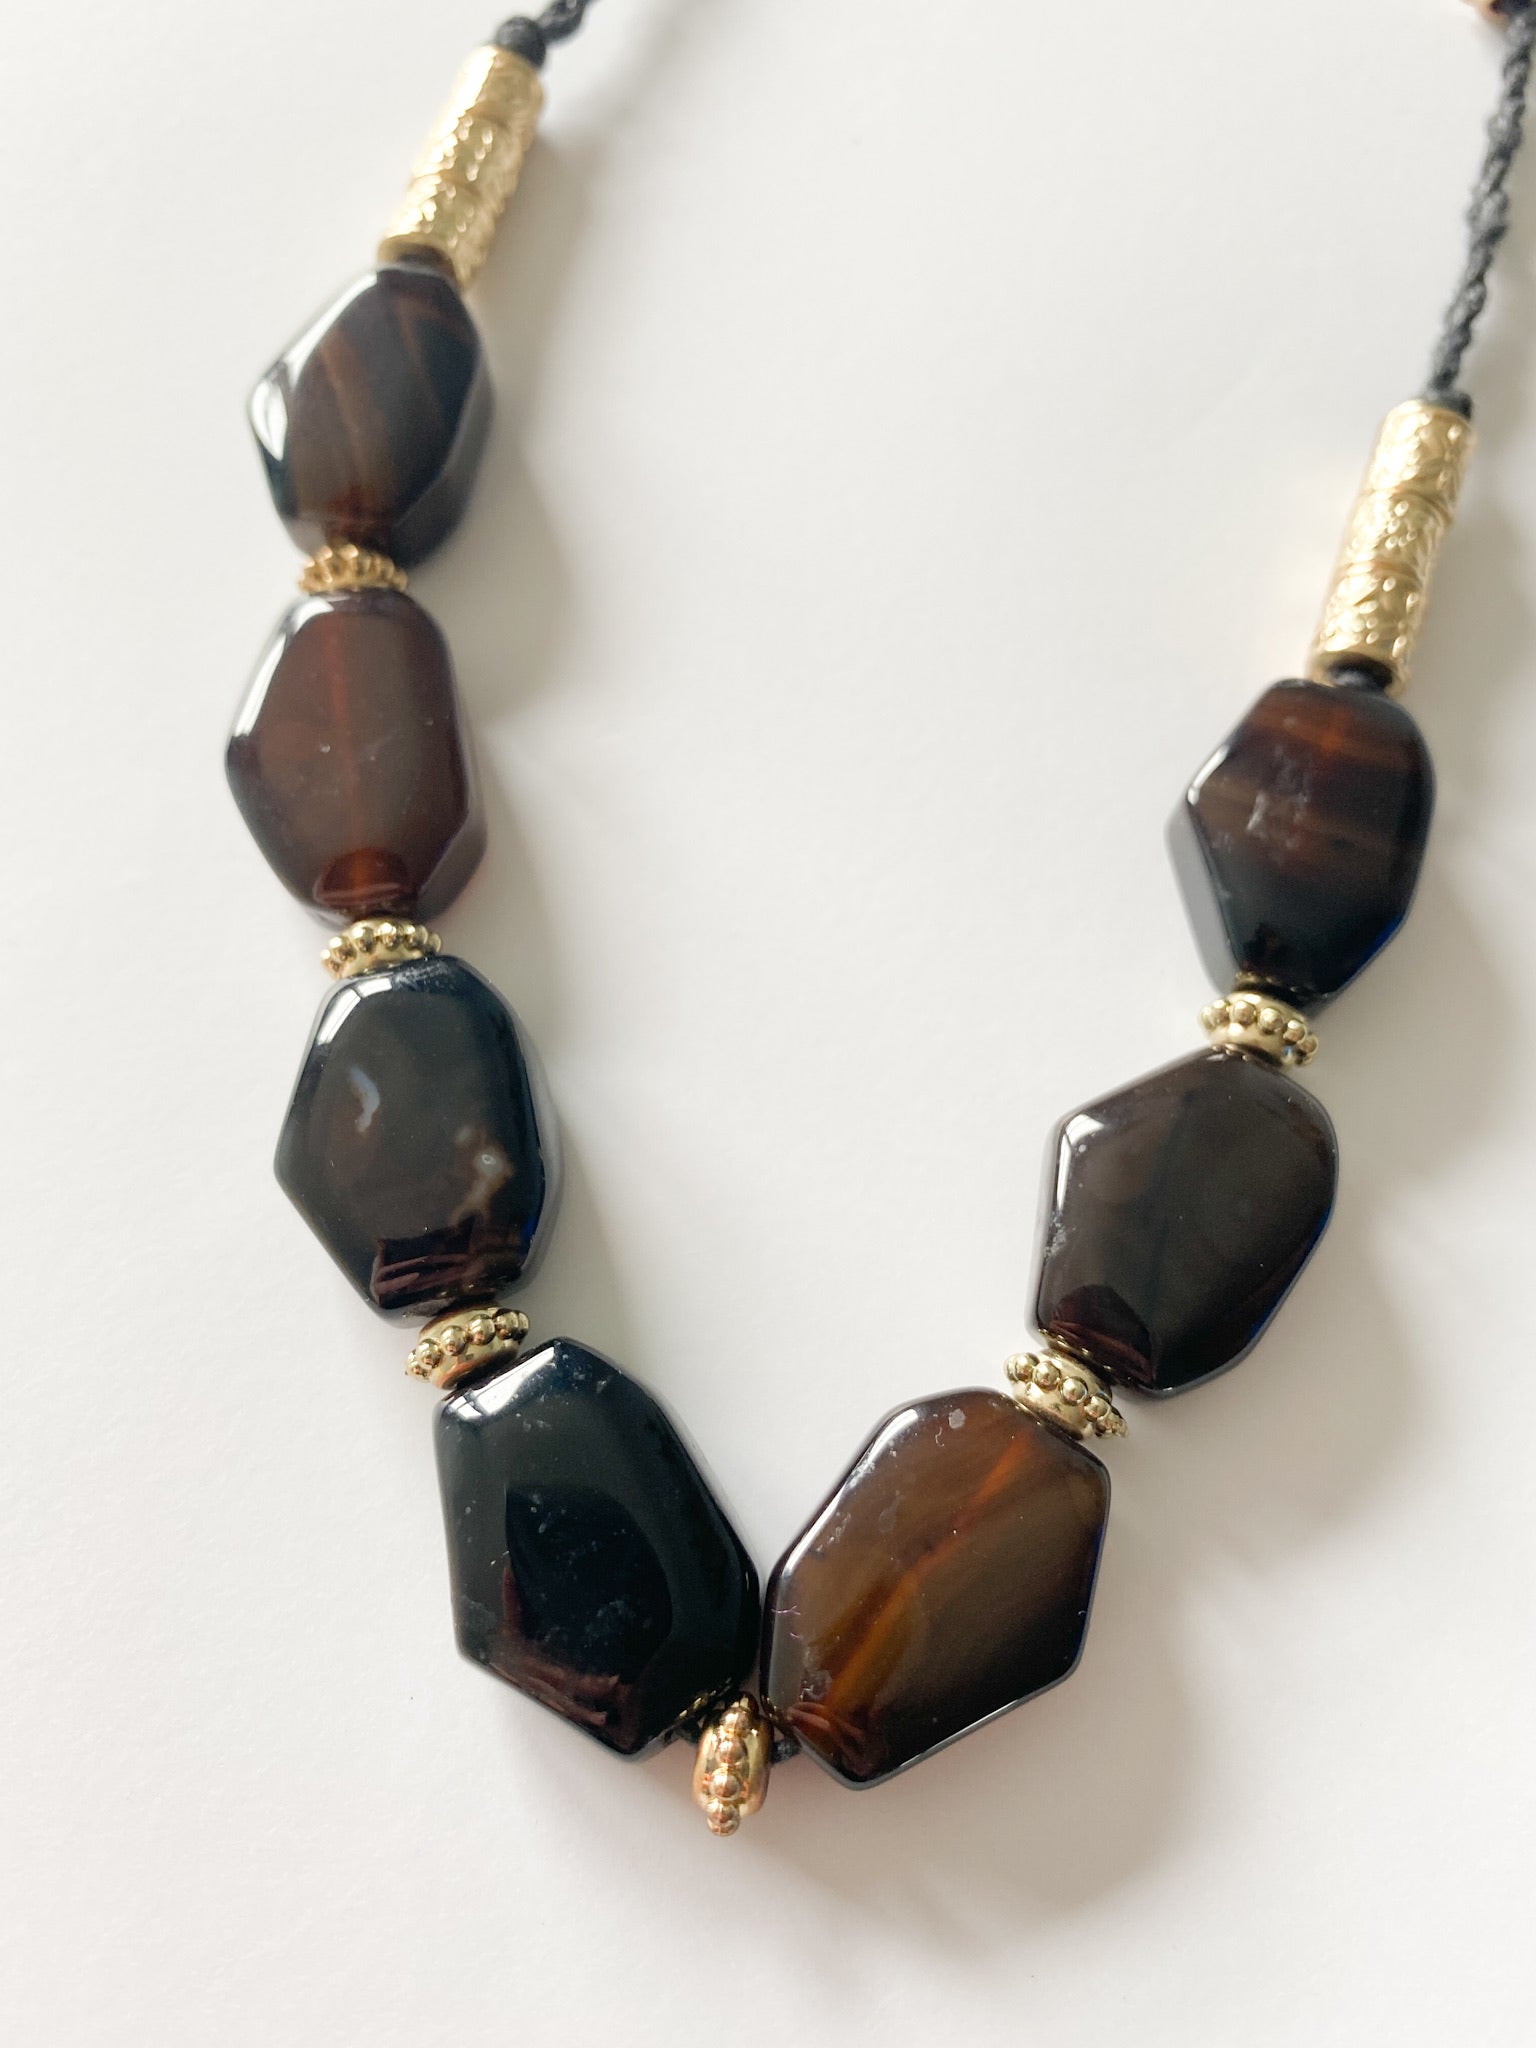 Boho Long Black Stone and Gold Bead Rope Necklace - Le Prix Fashion & Consulting